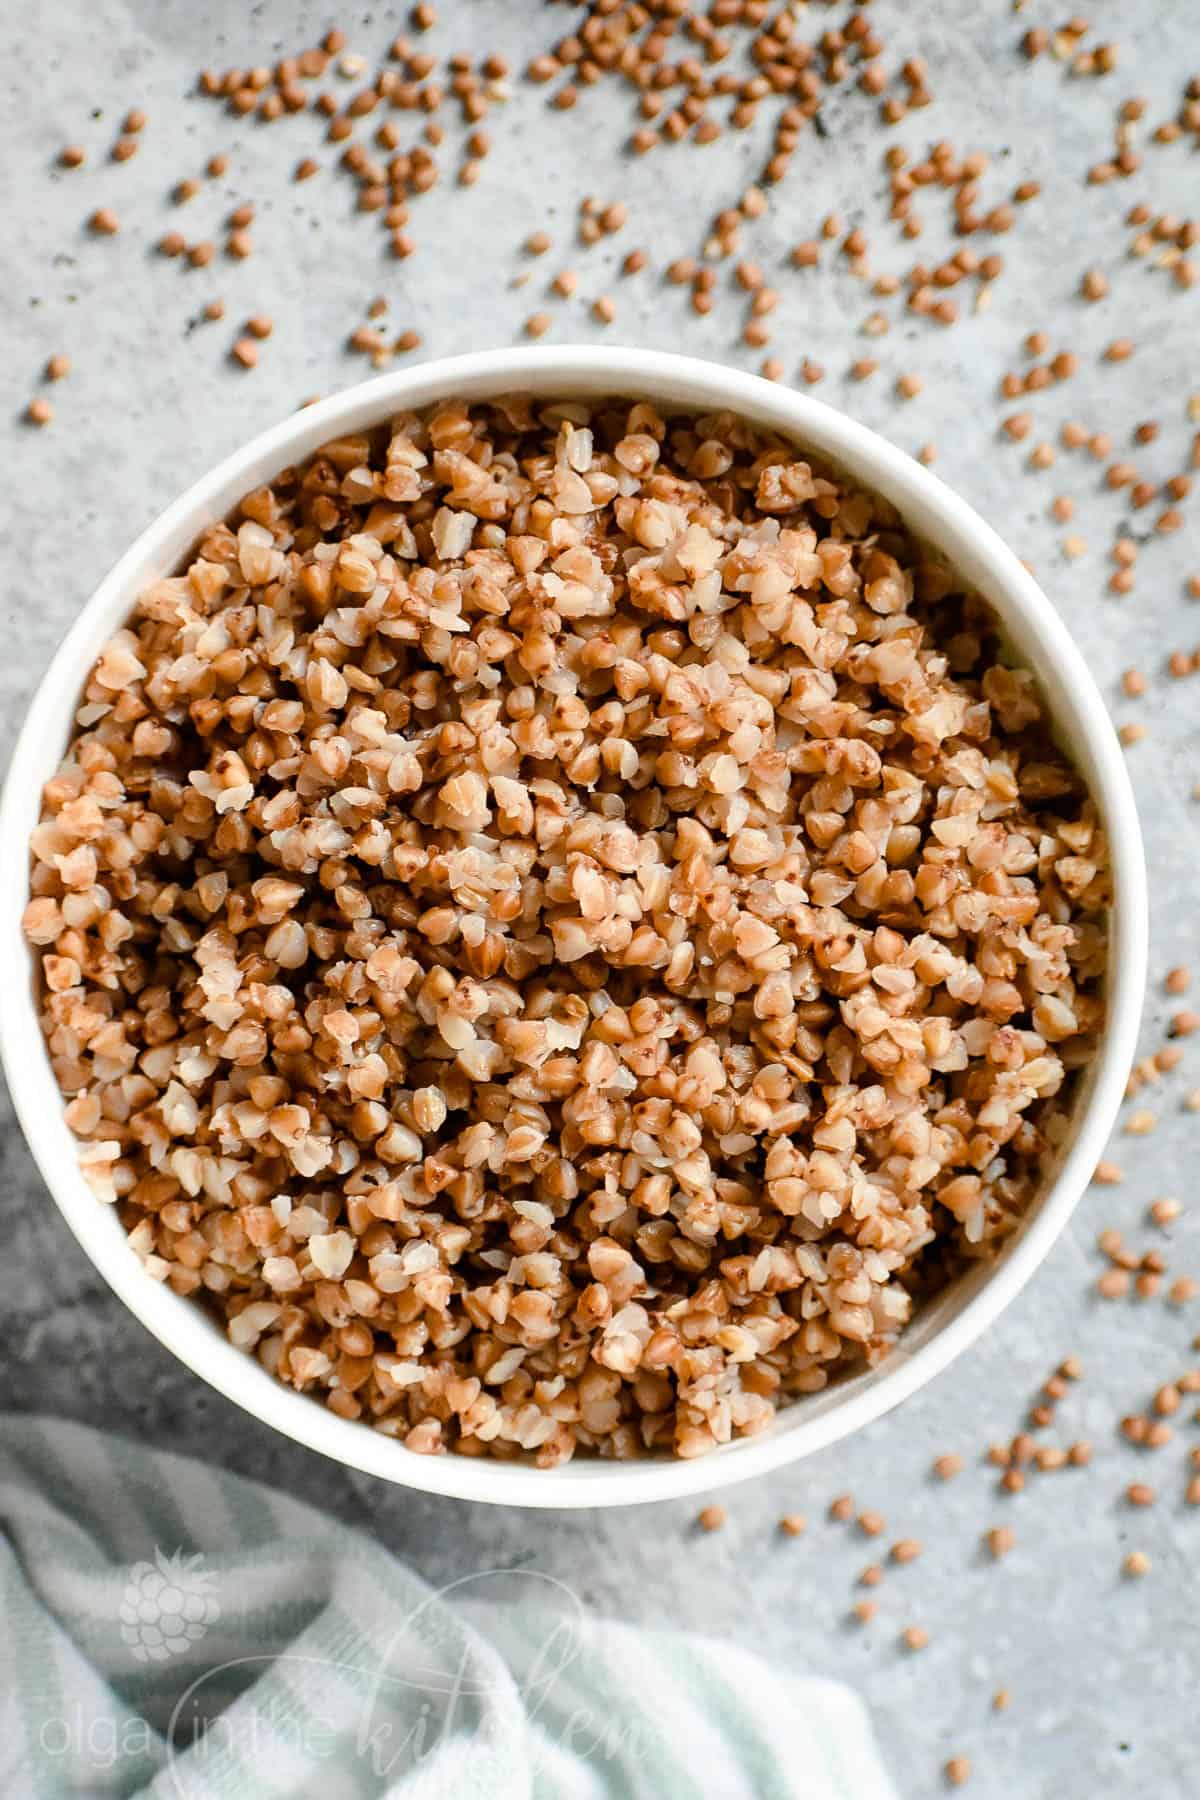 Buckwheat is a healthy, gluten-free seed with a nutty, toasty flavor and soft texture. It's so easy to prepare and inexpensive. Learn How to Cook Buckwheat kasha perfectly every time! #buckwheat #olgainthekitchen #howto #sidedish #healthy #lowcarb